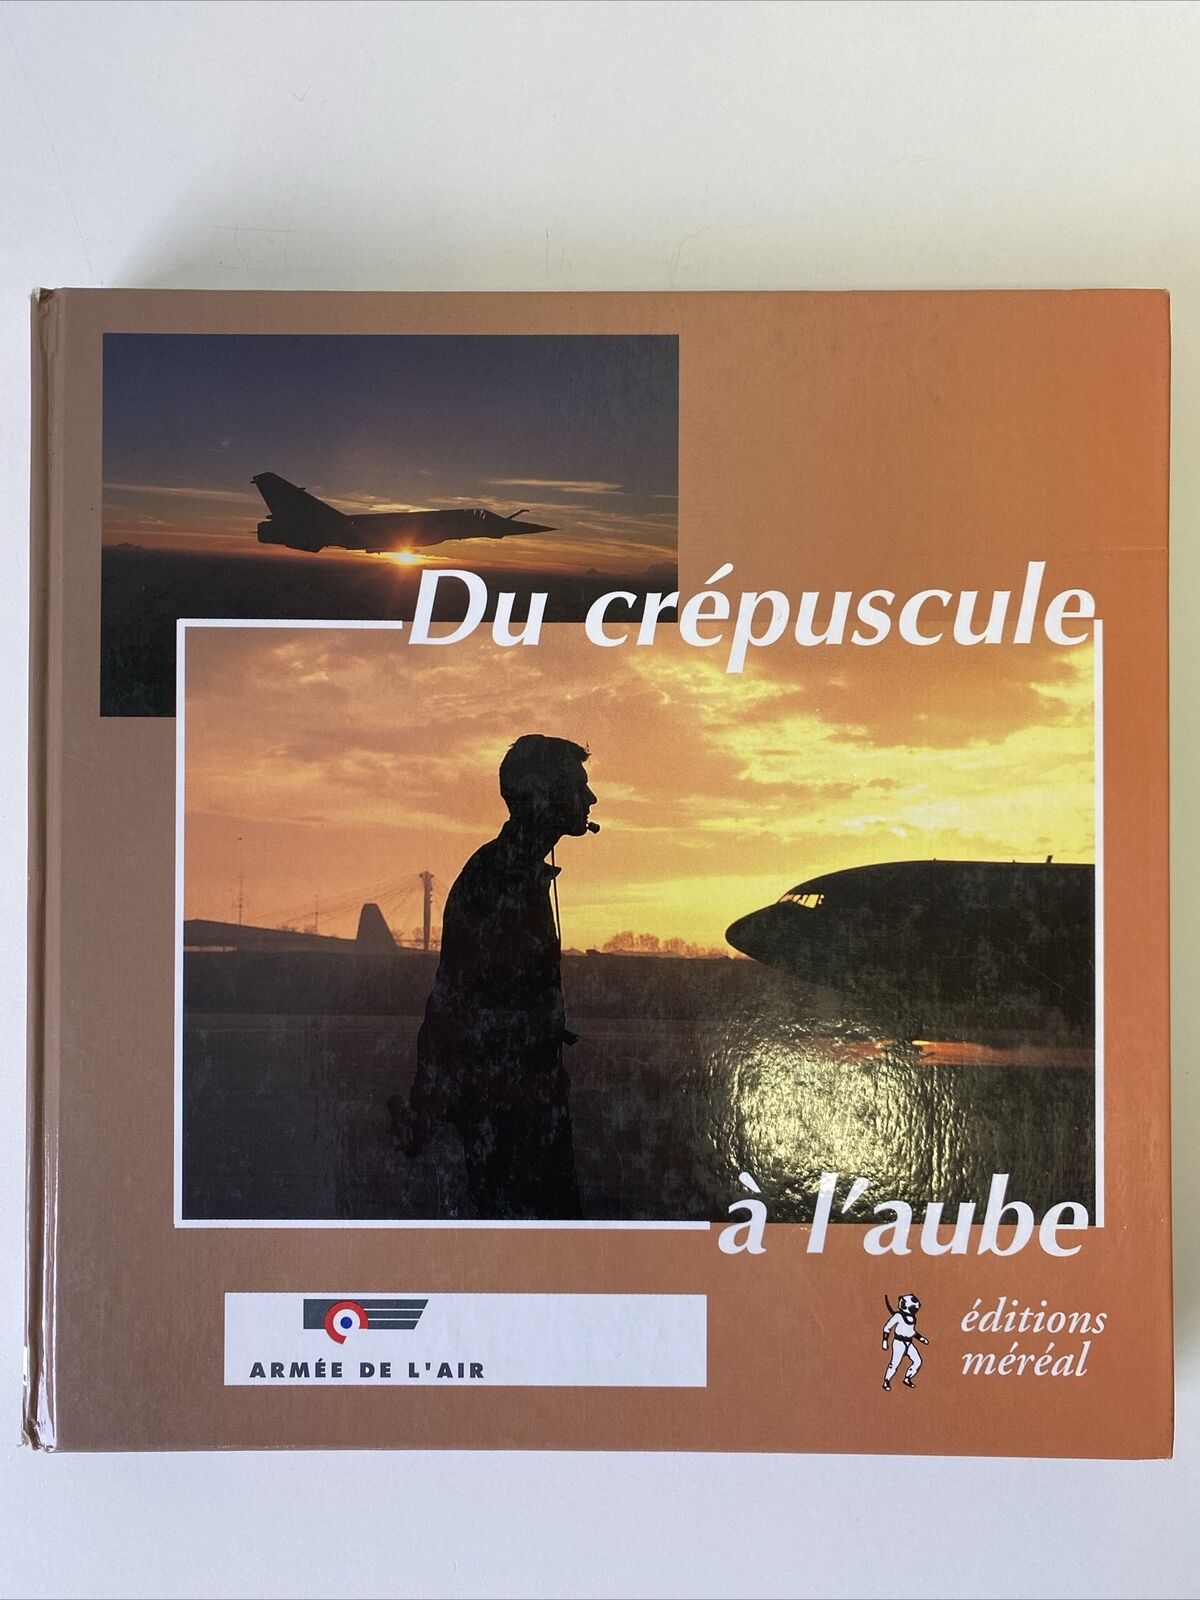 From dusk to dawn - 2000 French edition of Air Force